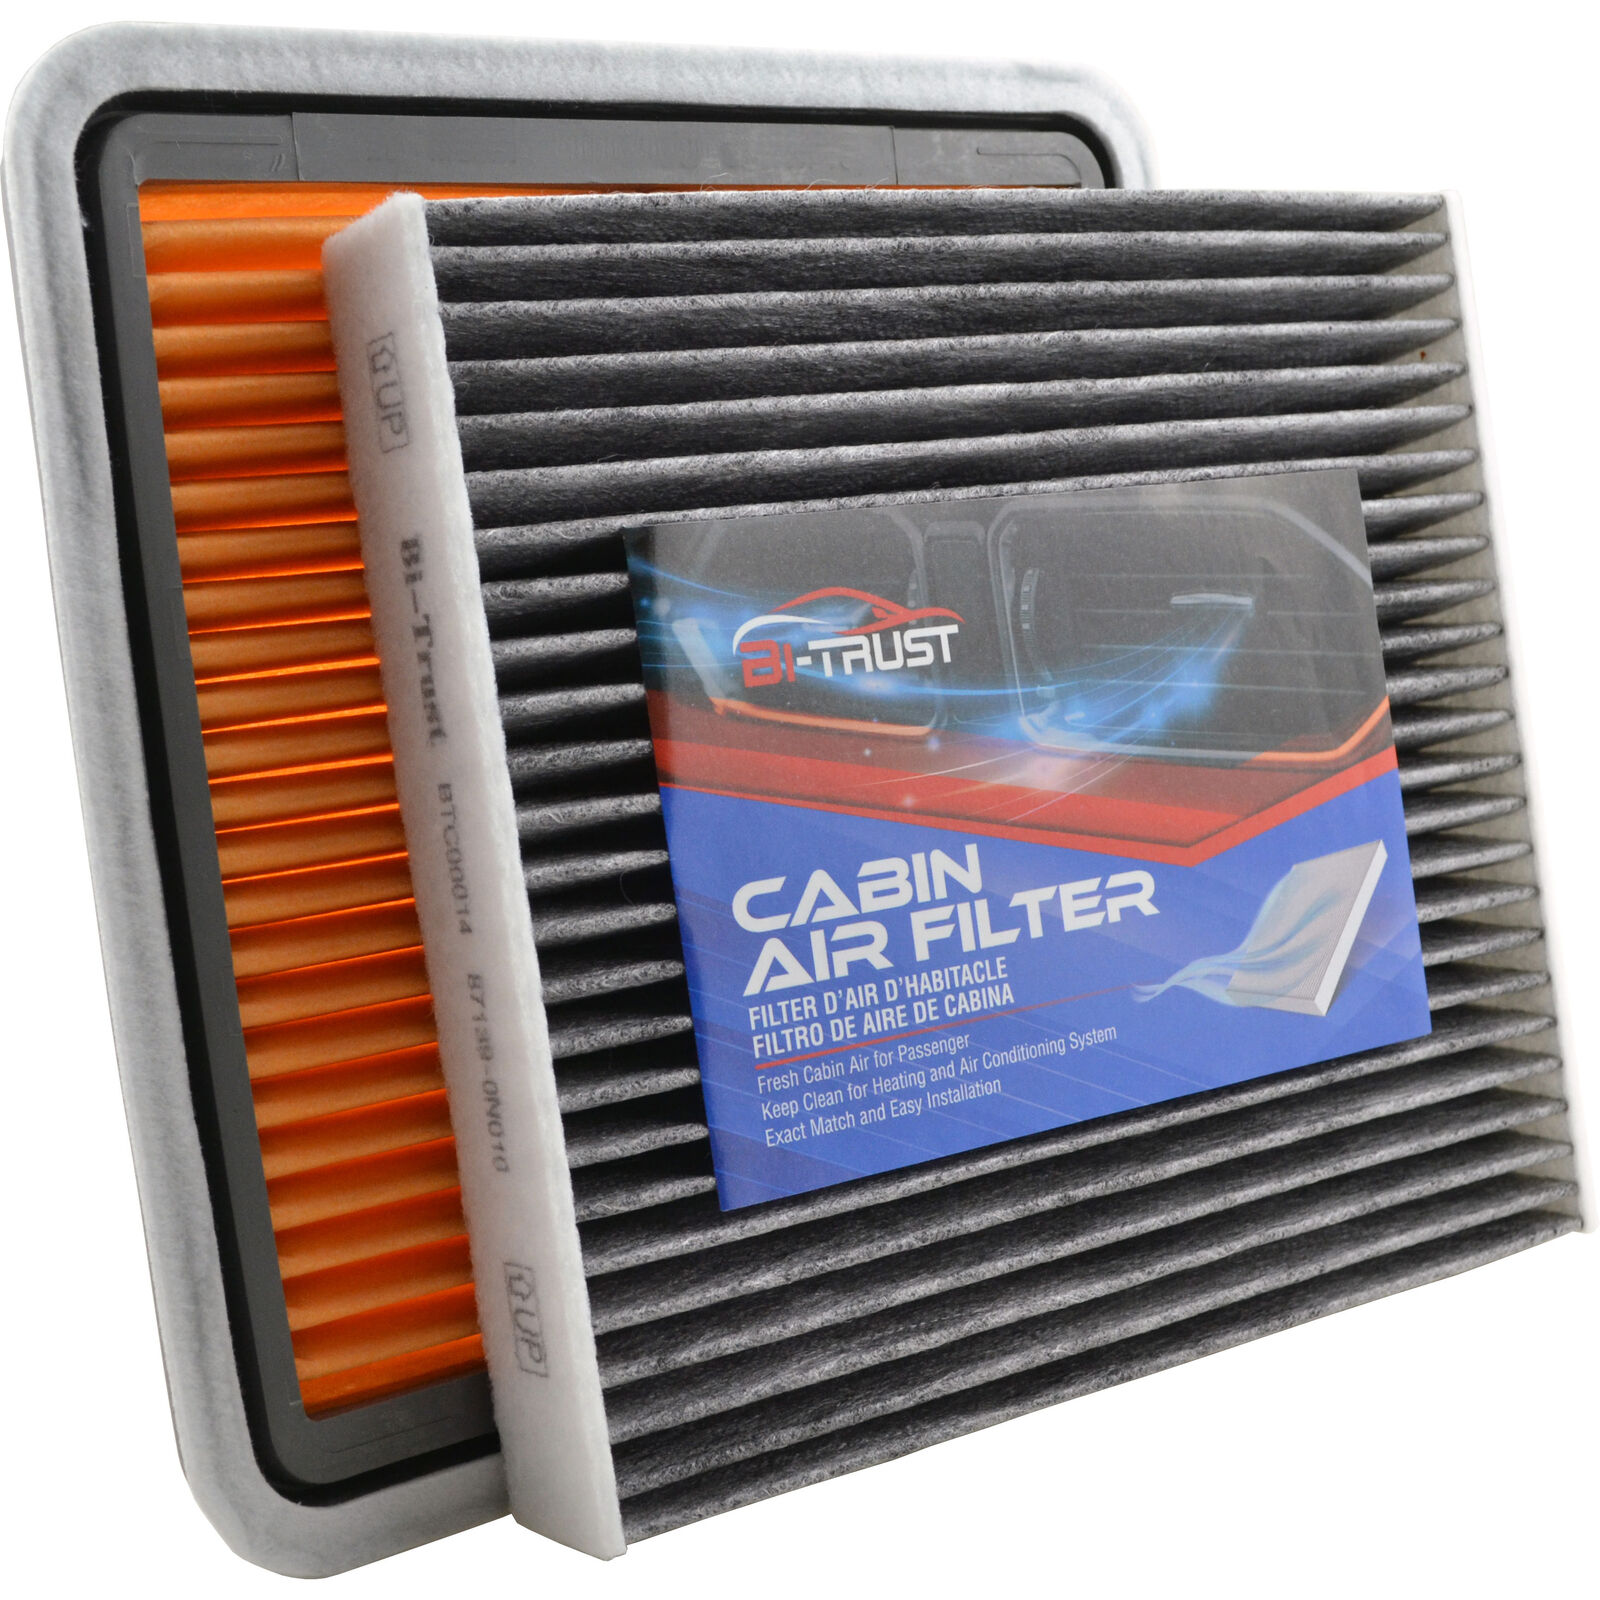 Engine & Cabin Air Filter Kit for 2010-2019 Subaru Outback Legacy 2.5L 3.6L